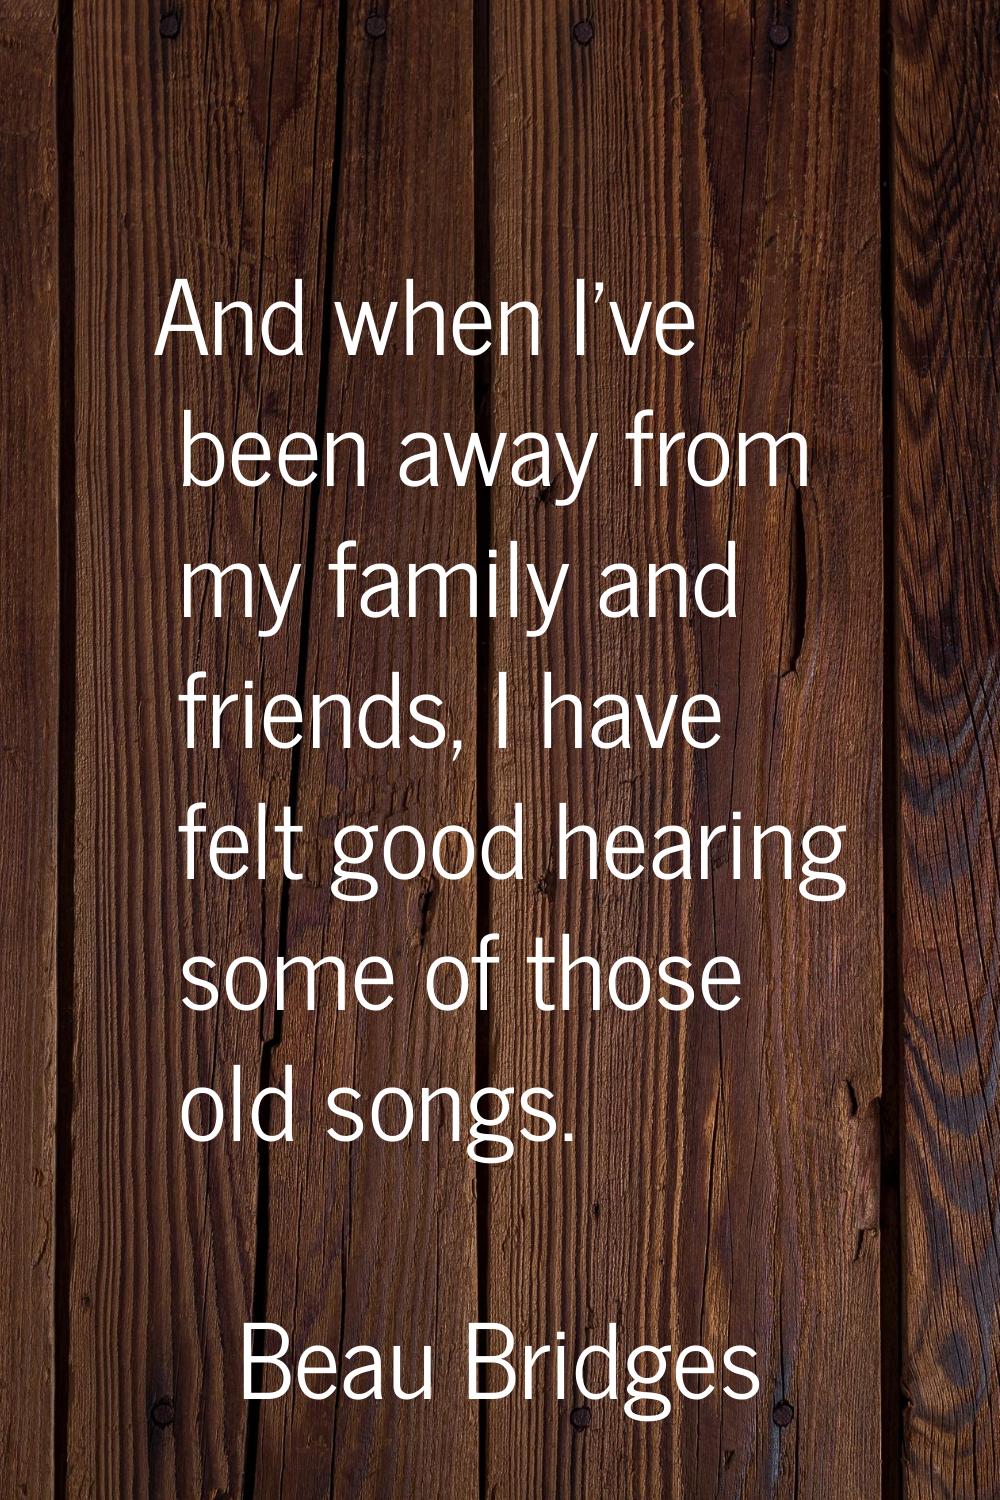 And when I've been away from my family and friends, I have felt good hearing some of those old song